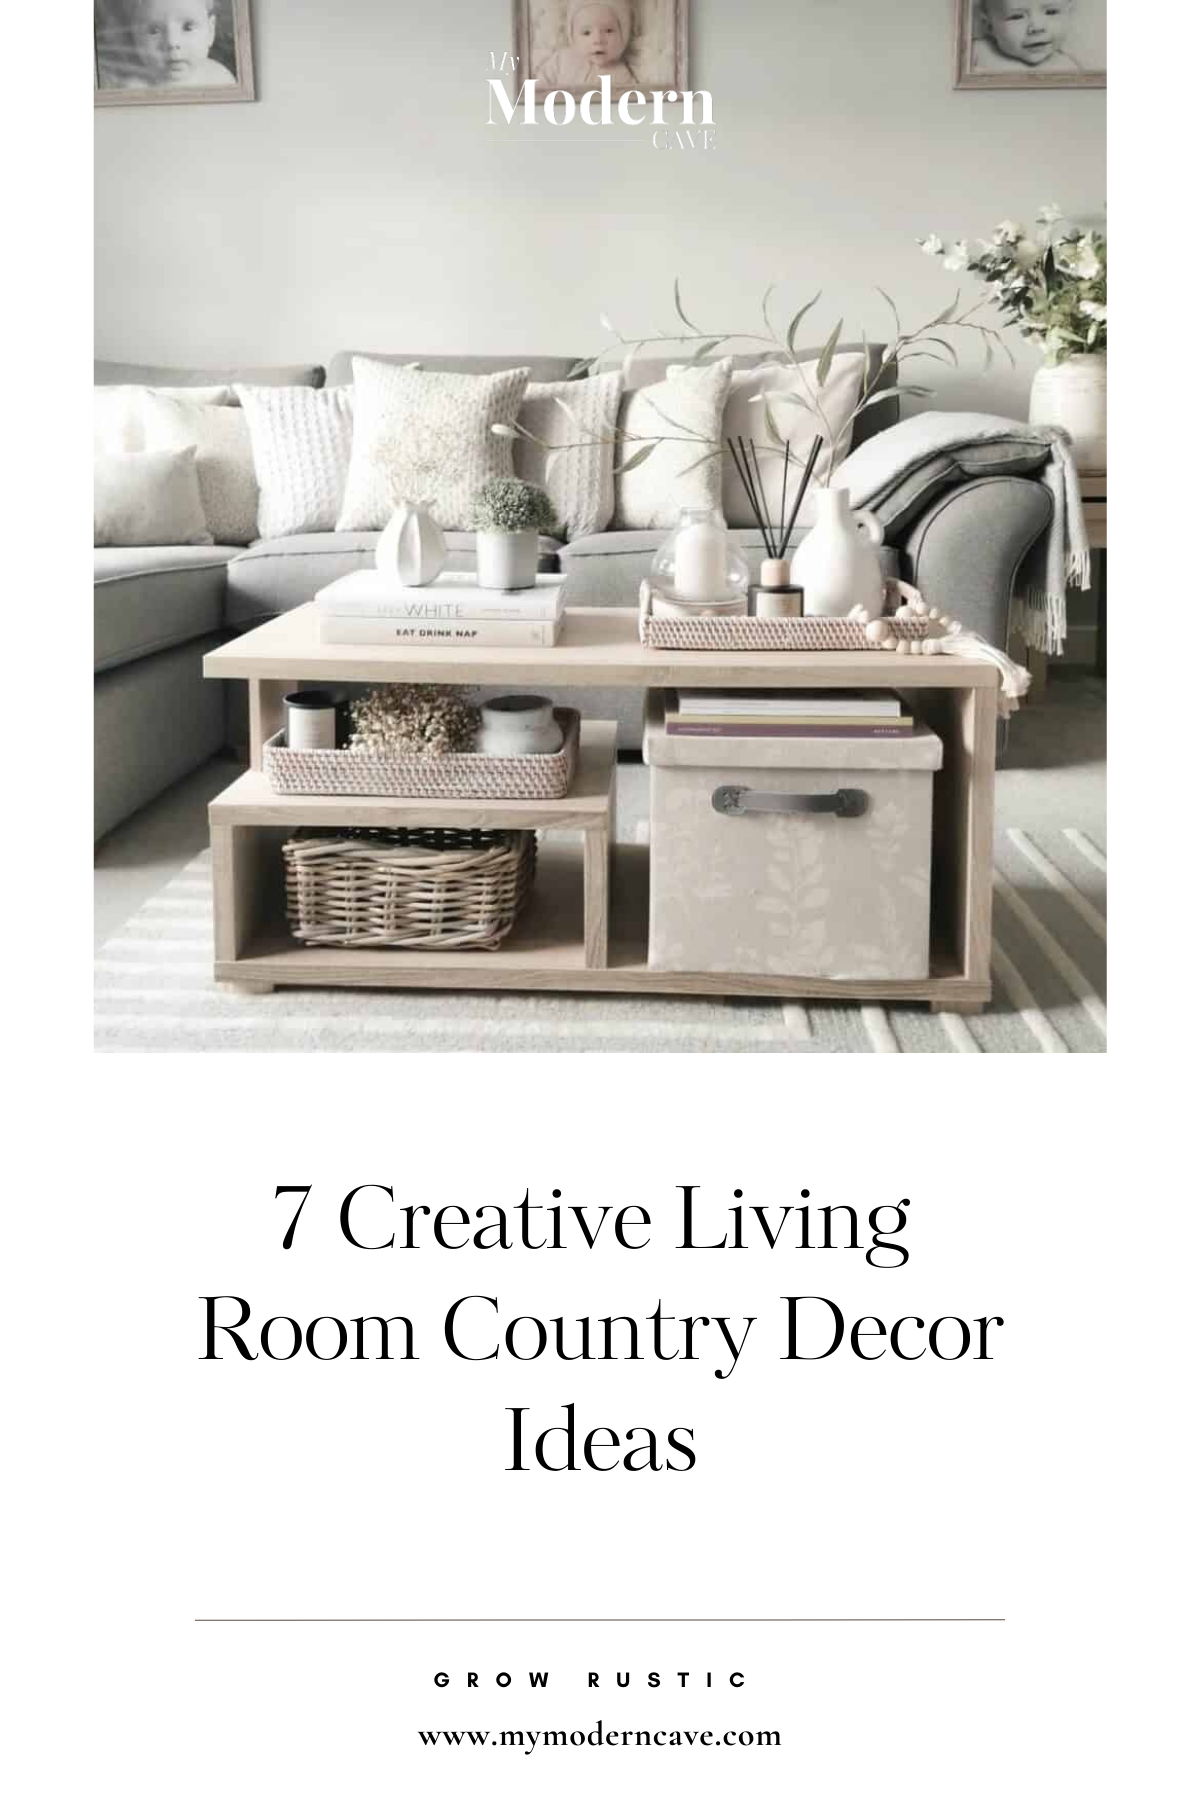 Living Room Country Decor Ideas Infographic